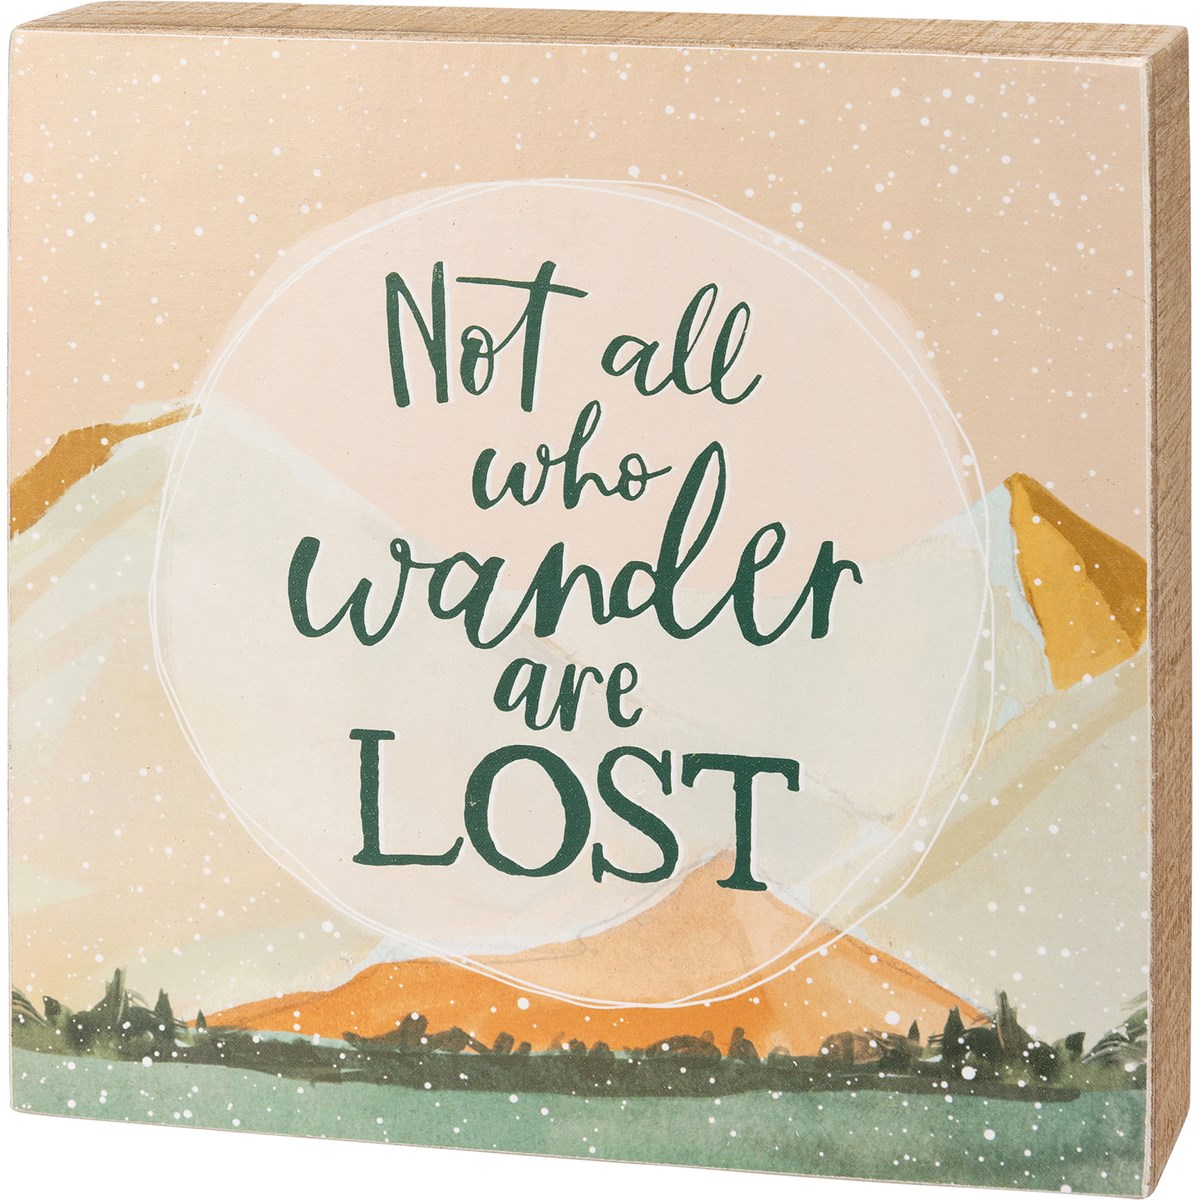 Box Sign - Not All Who Wander Are Lost - 8" x 8" x 1.75" - Wood, Paper